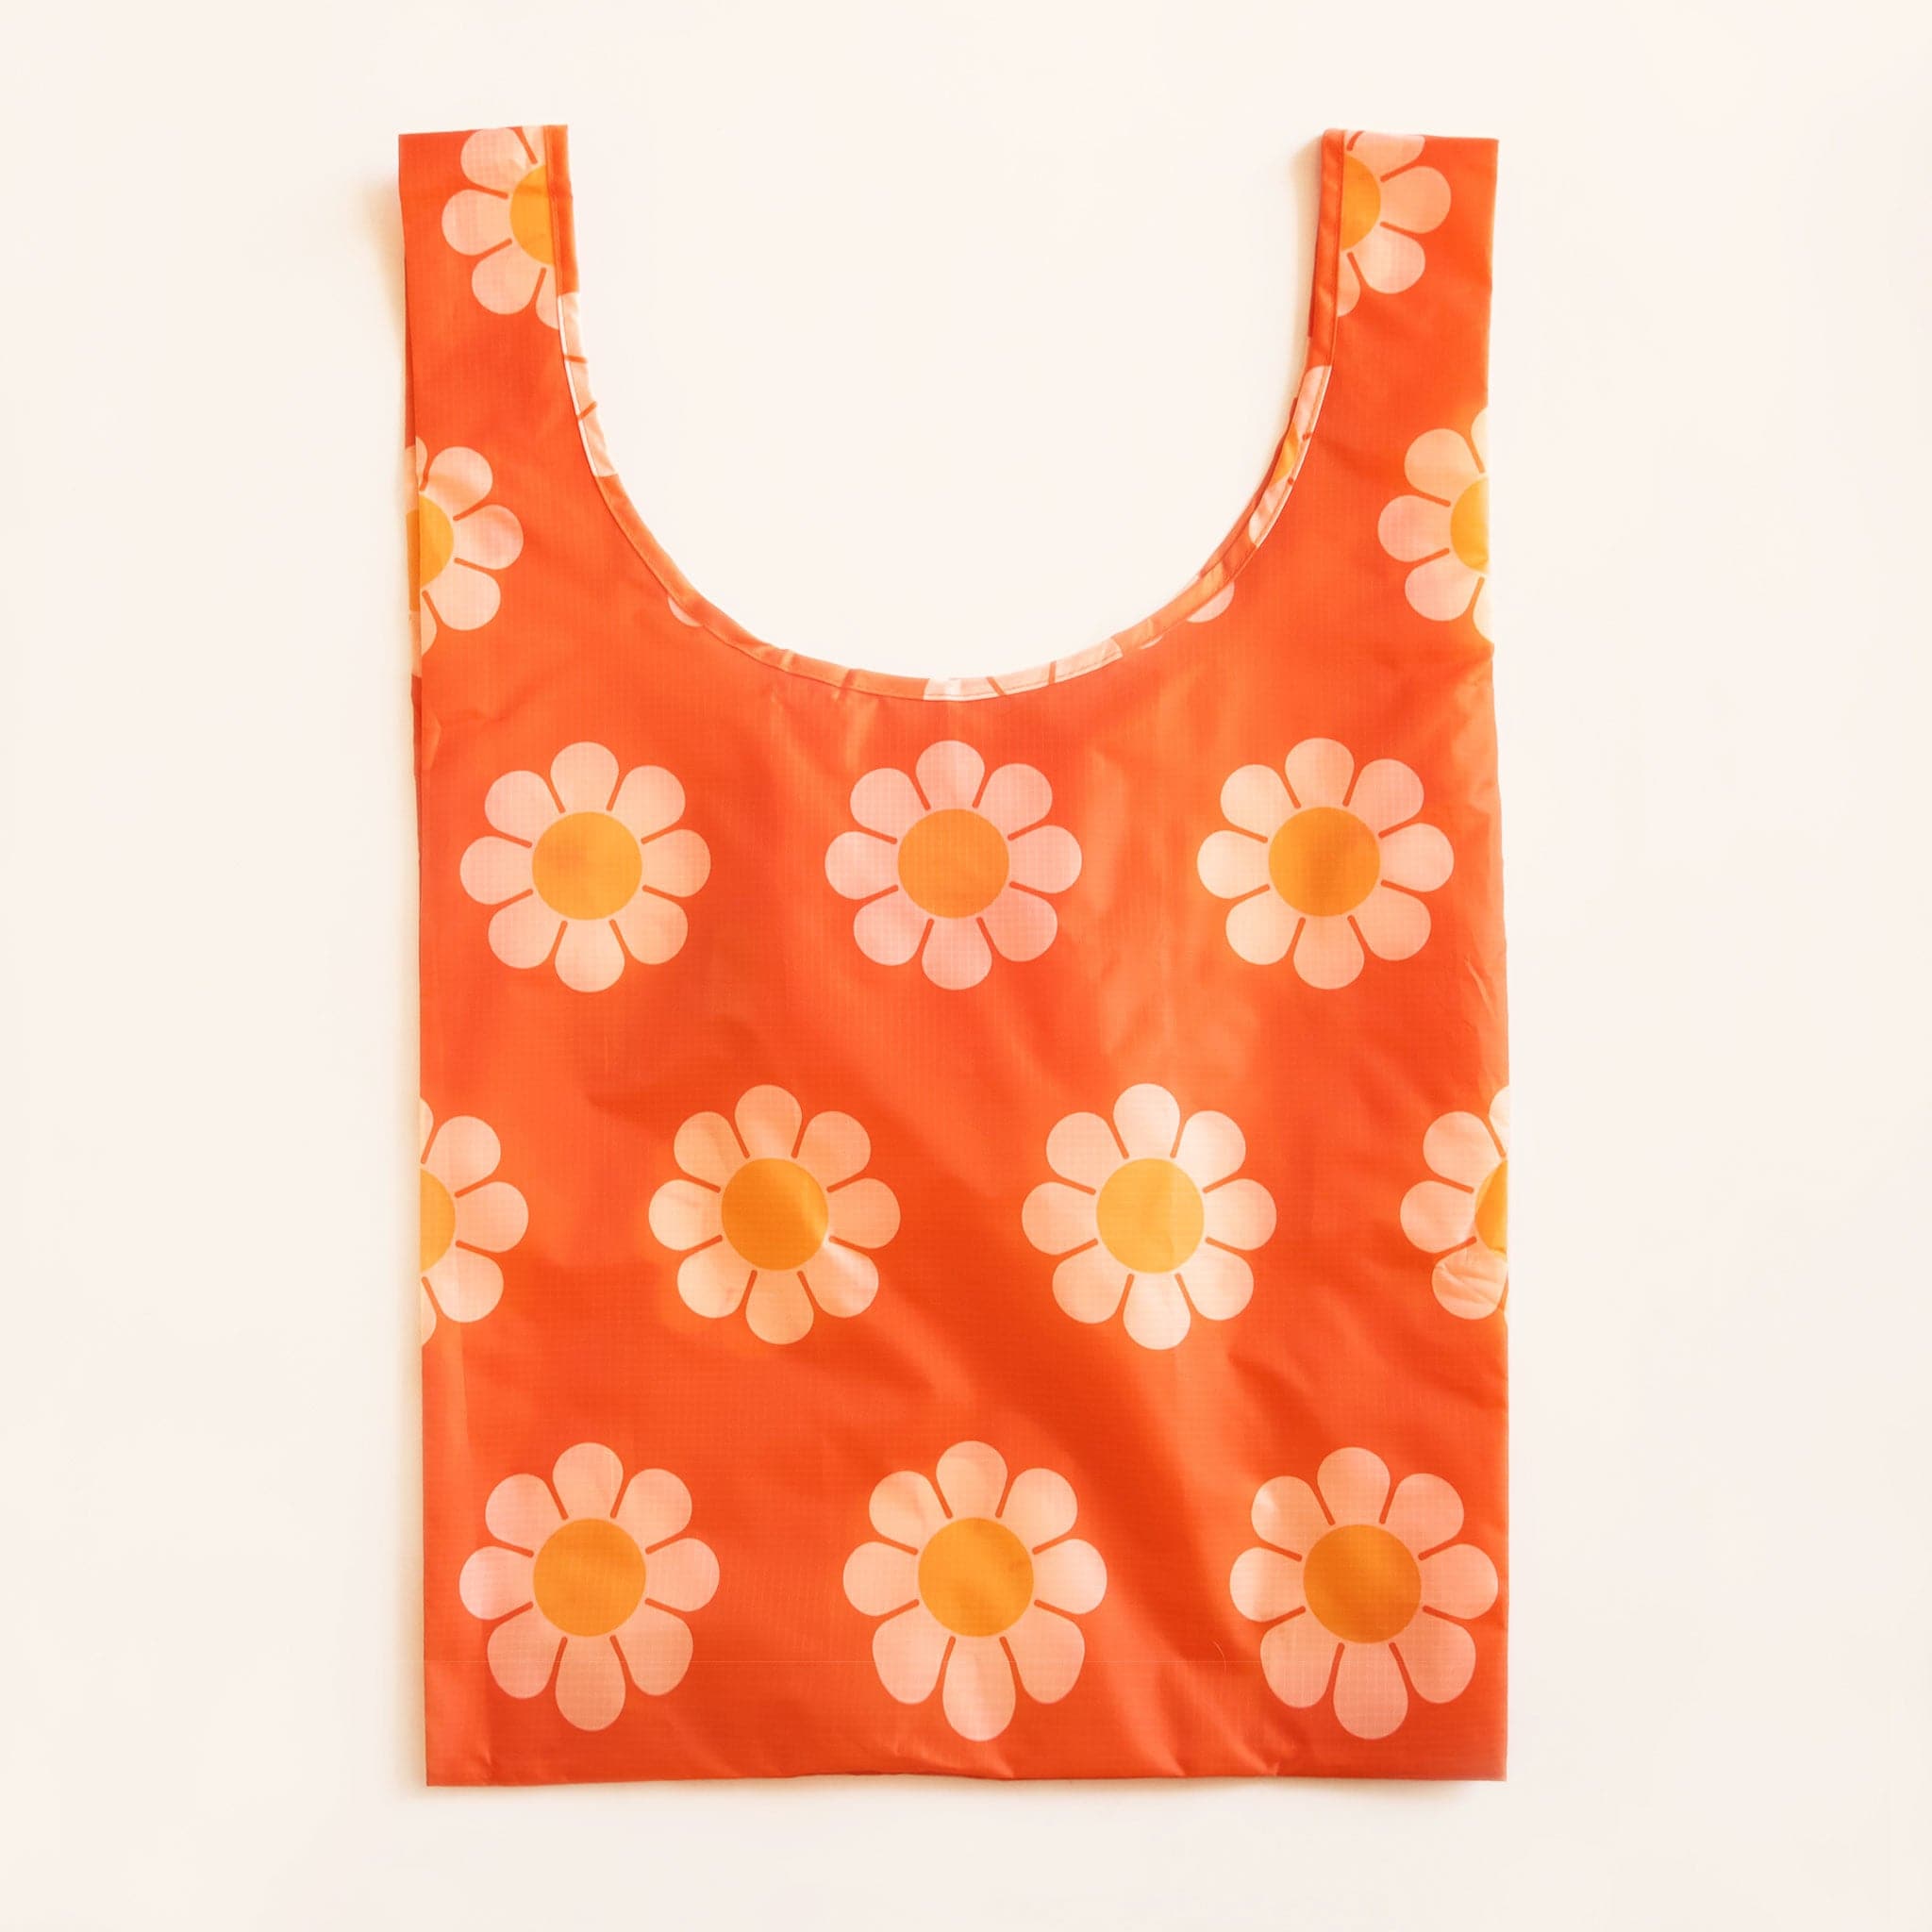 Red-orange reusable covered in a print of simple flowers with white petals and orange centers. The bag is positioned flat on a table and has a &#39;U&#39; shape between two handles.